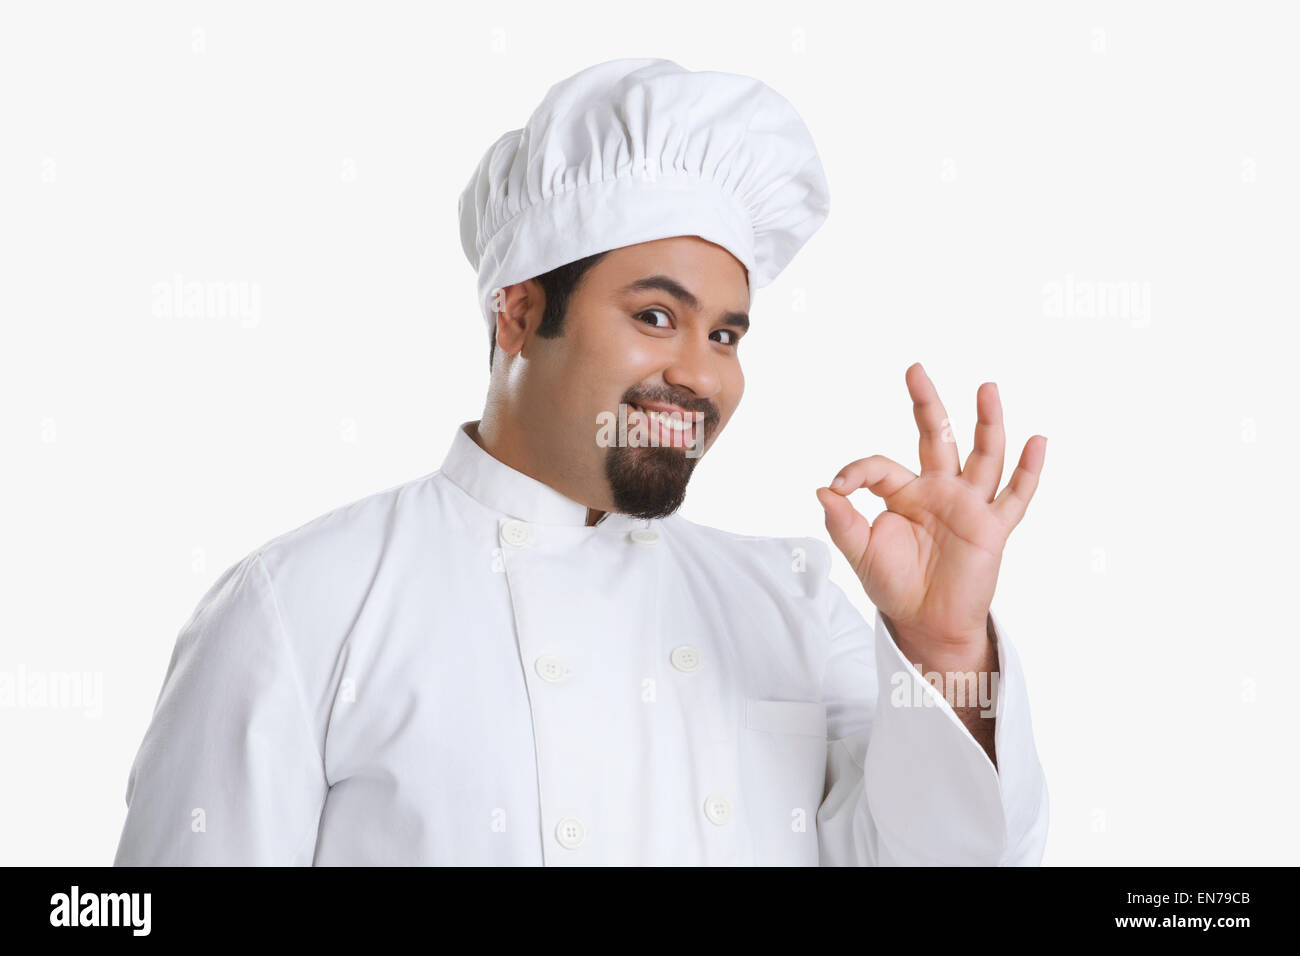 Portrait of chef giving ok hand gesture Stock Photo